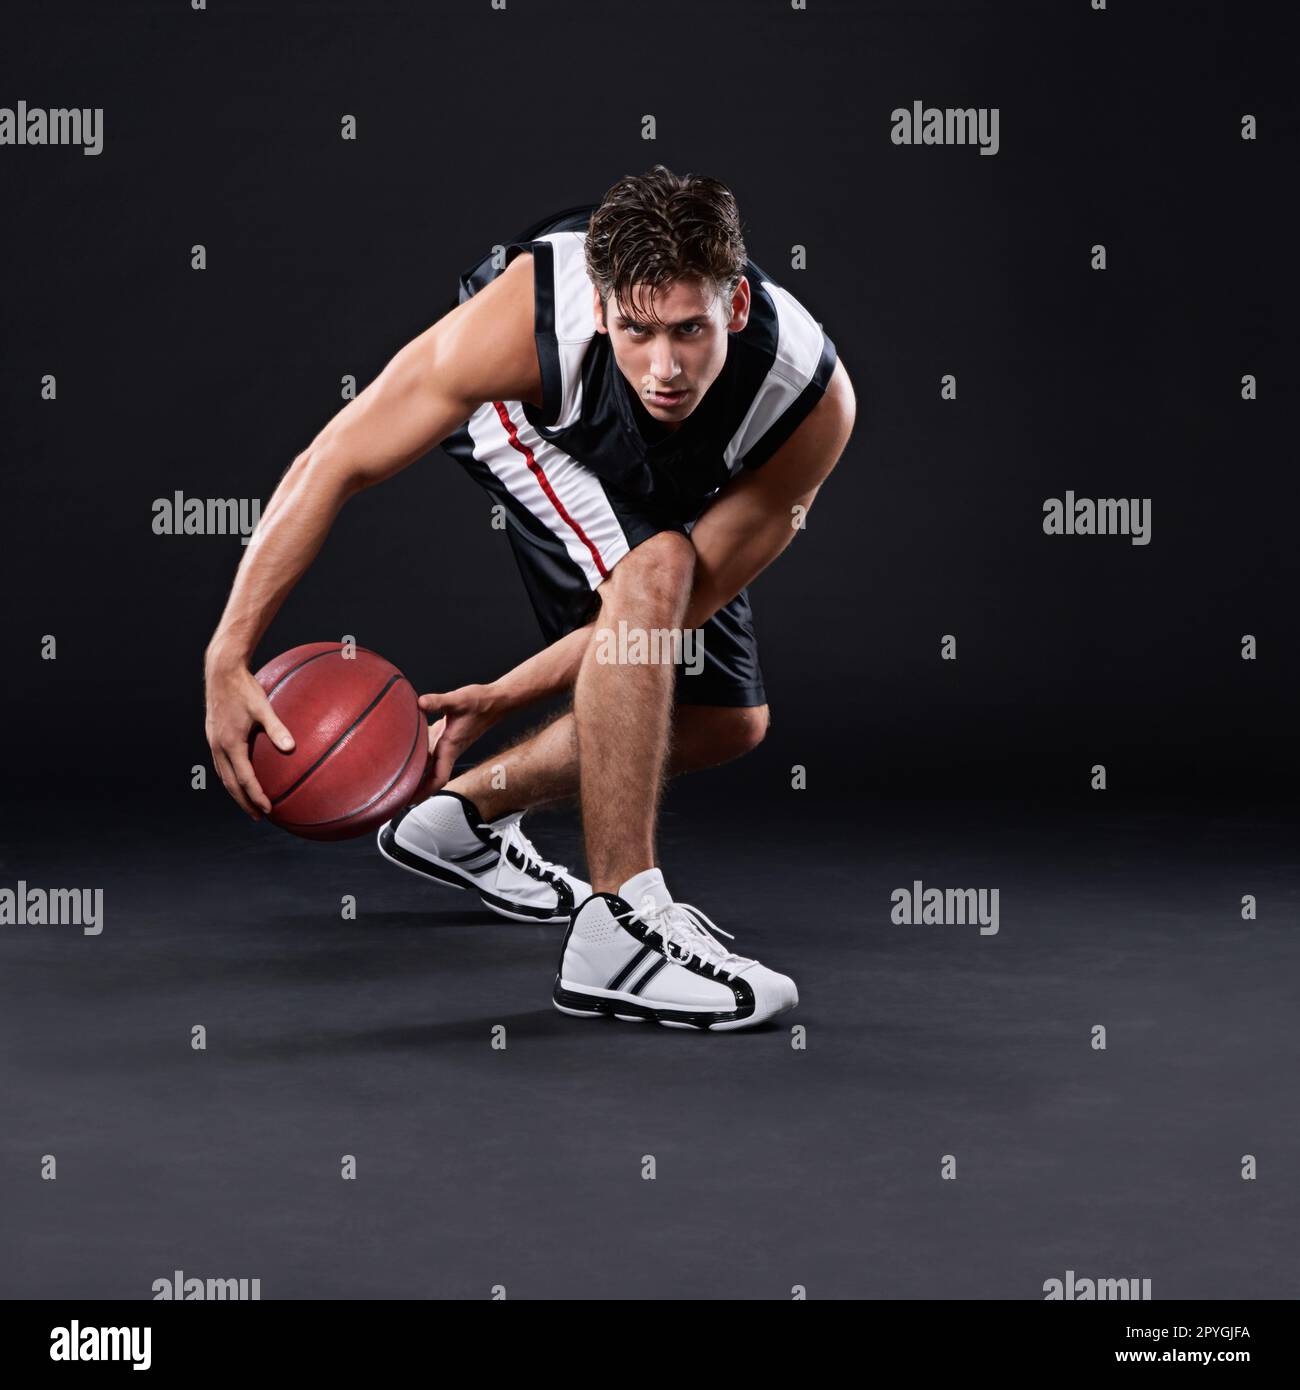 Dont run away from challenges, run over them. Full length portrait of a male basketball player in action against a black background. Stock Photo